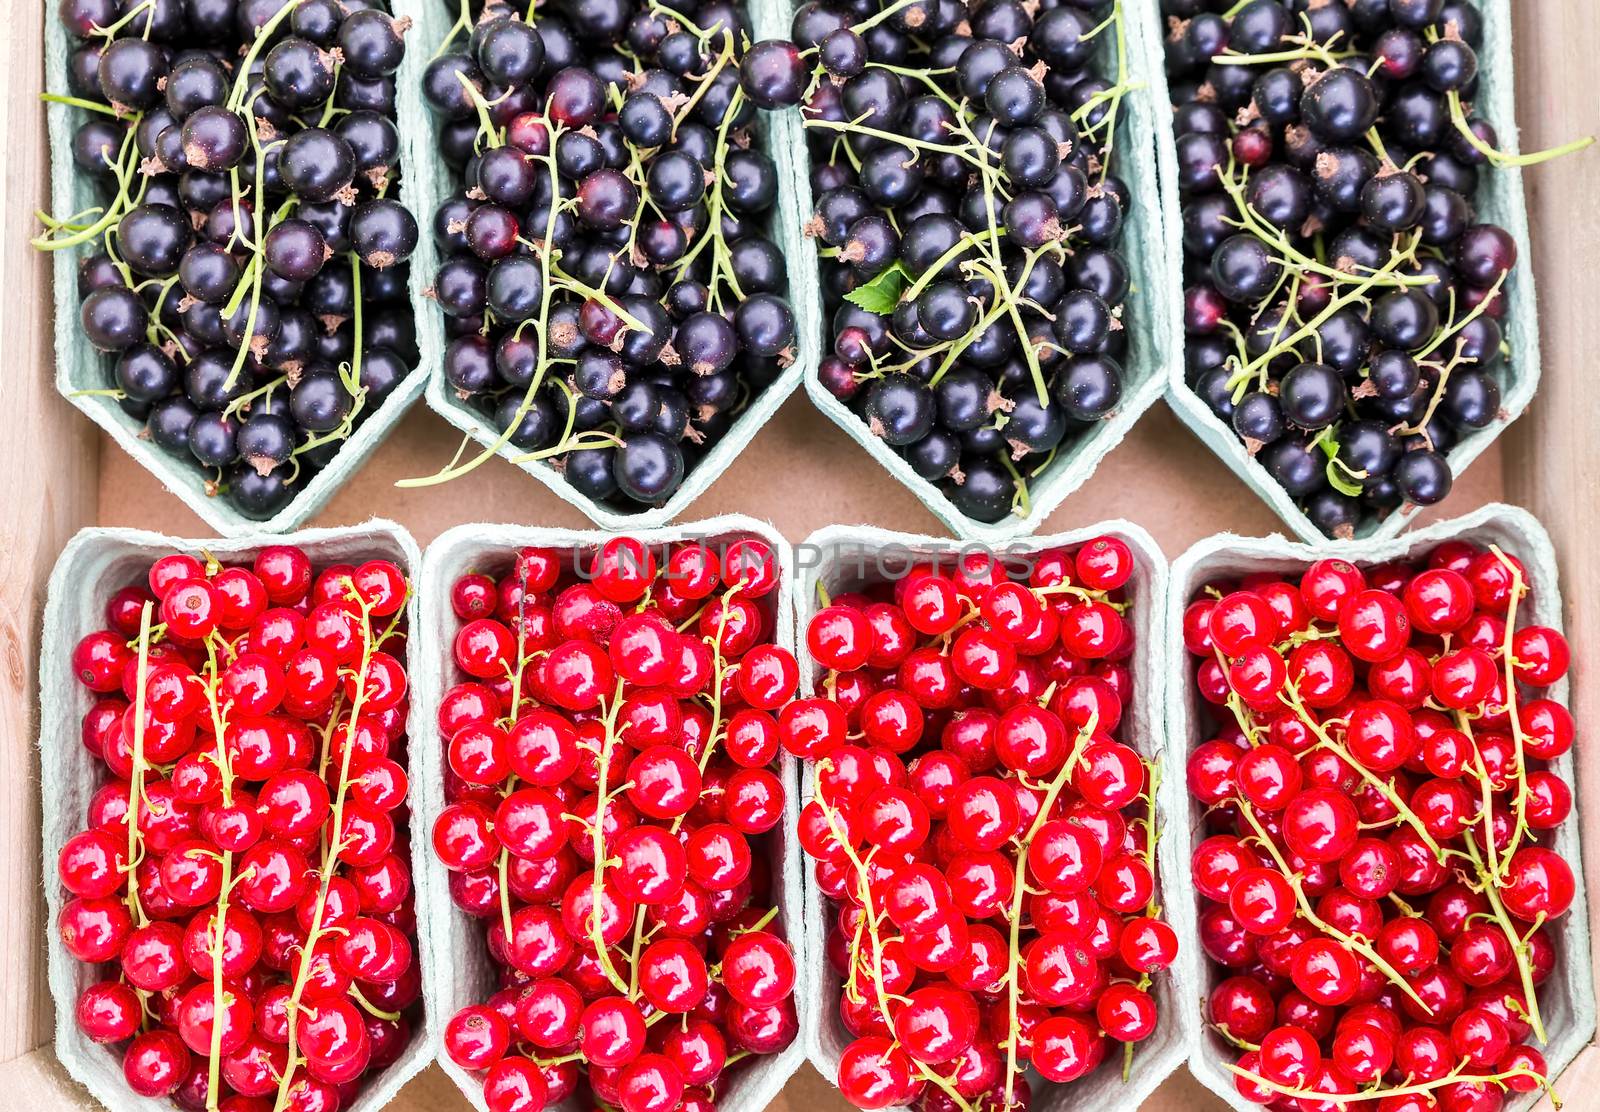 Fruit baskets with red berries and black currants on market